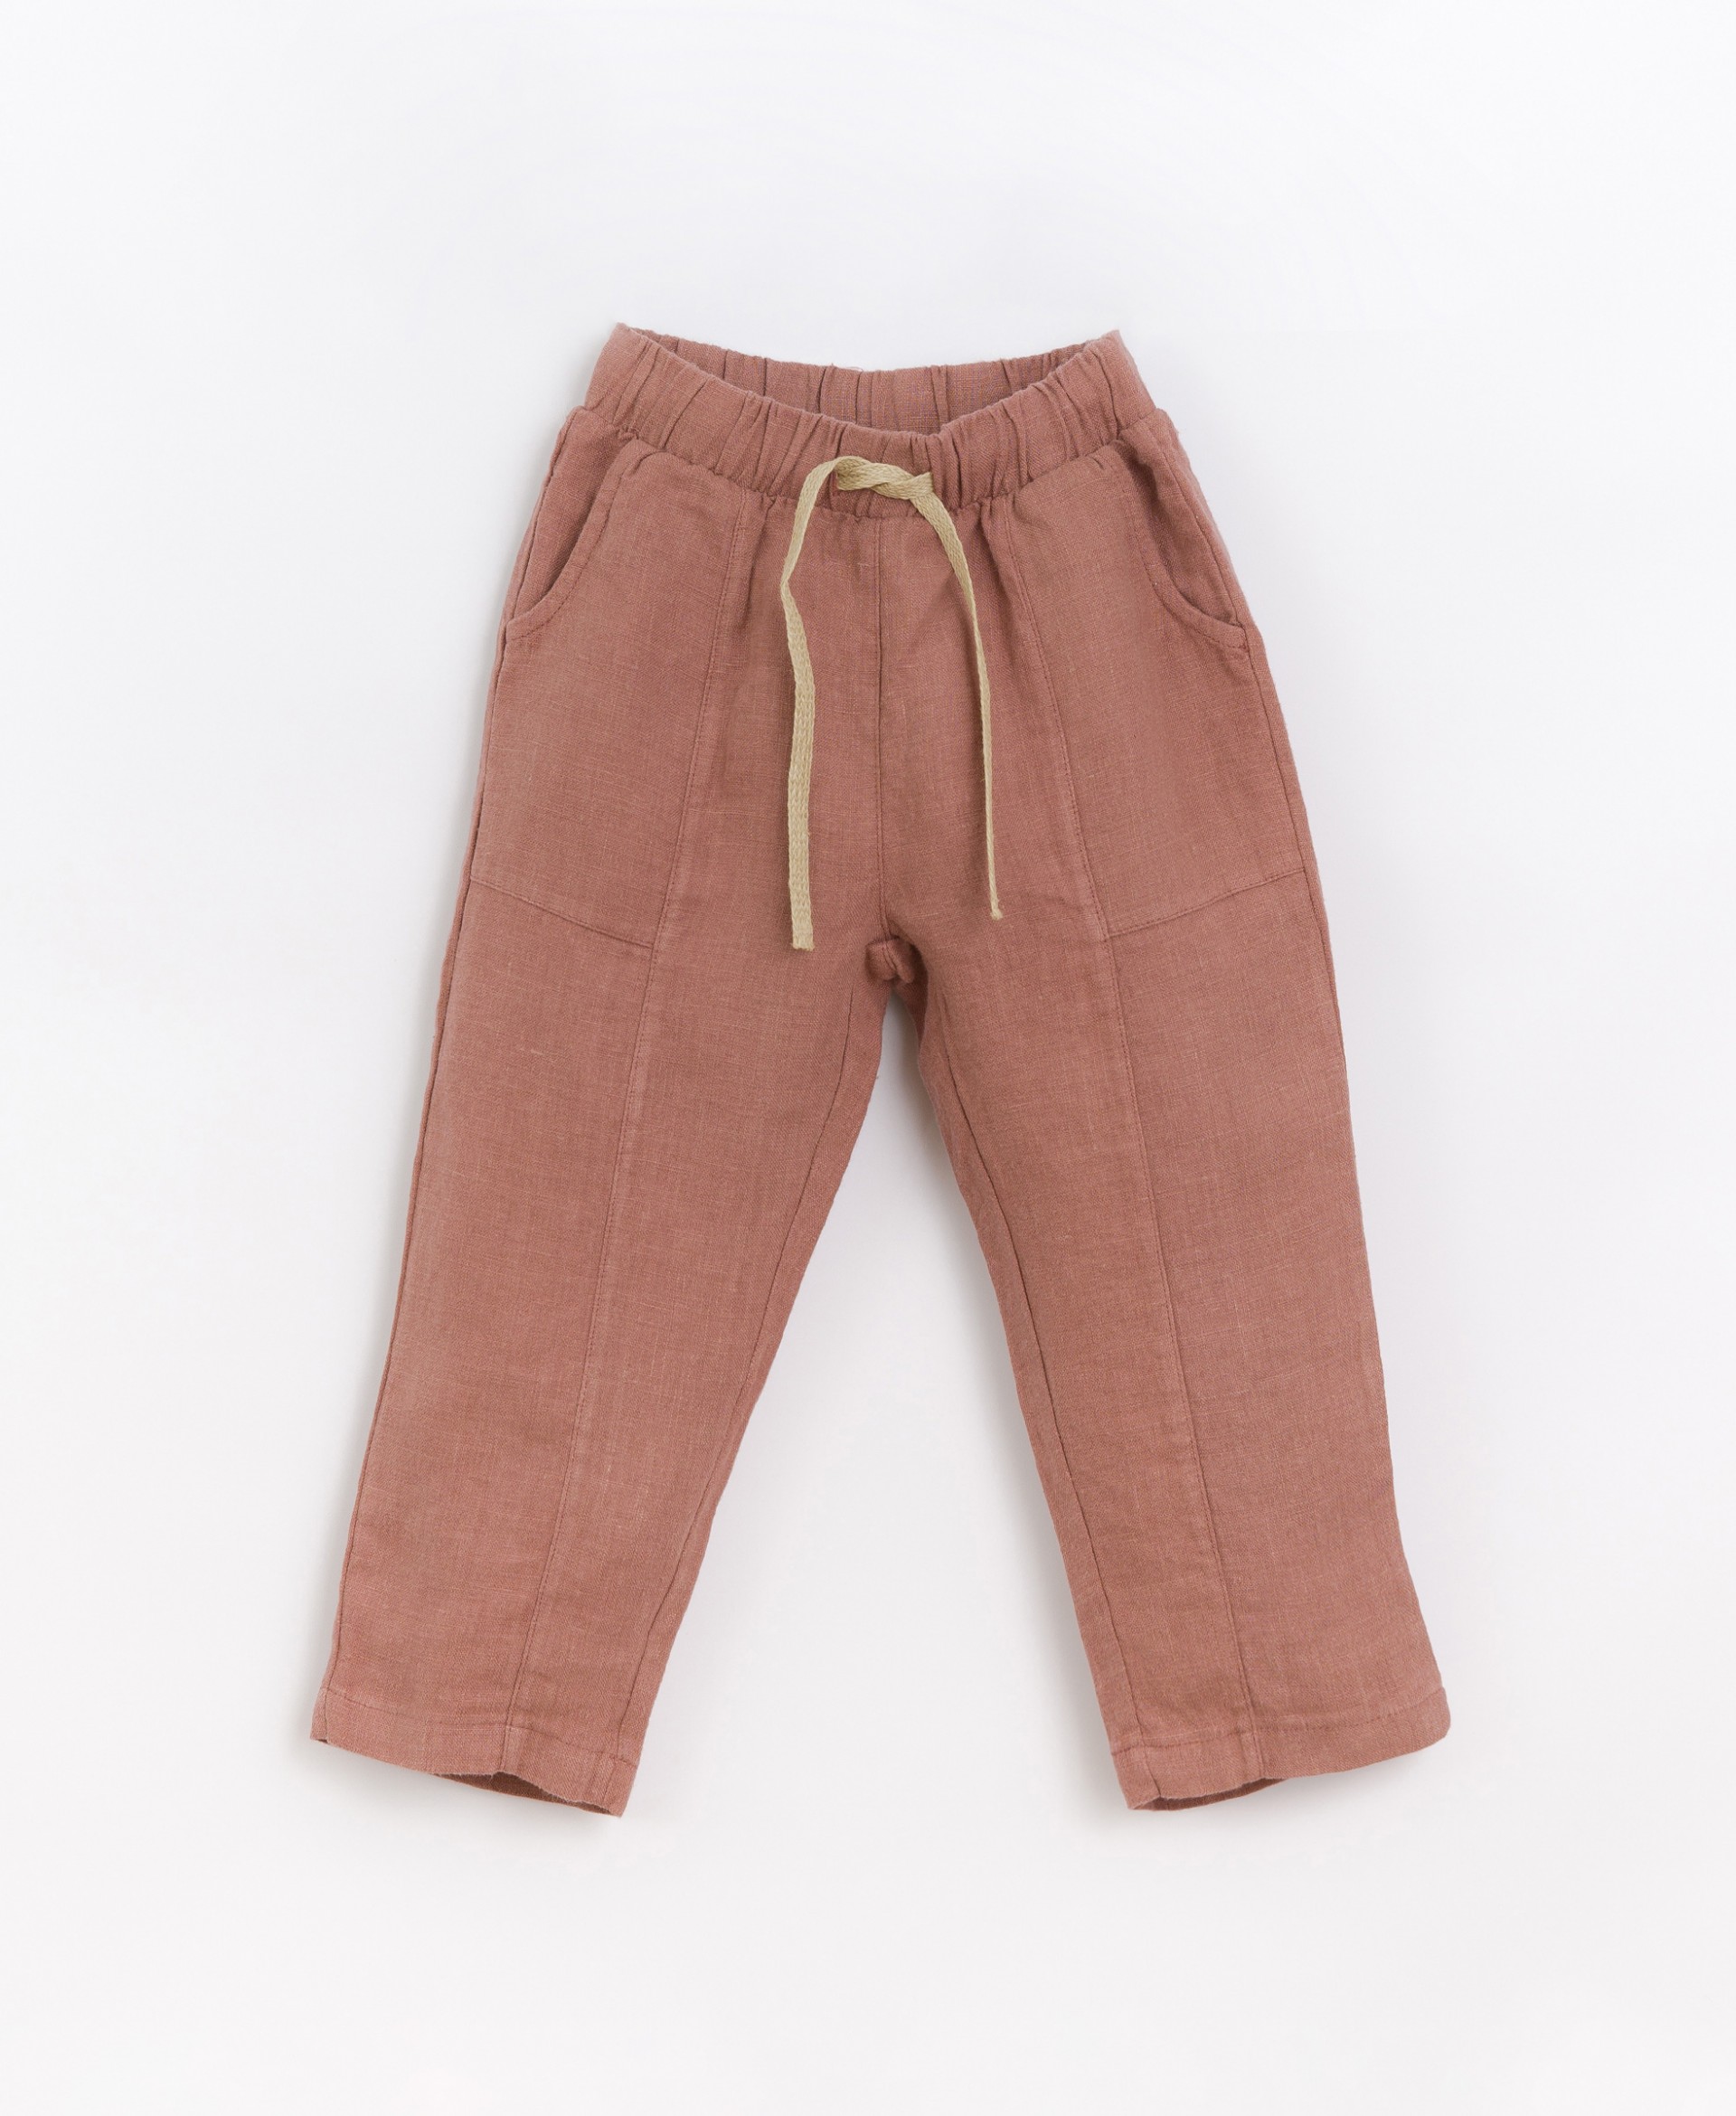 Pants in linen fabric | Basketry